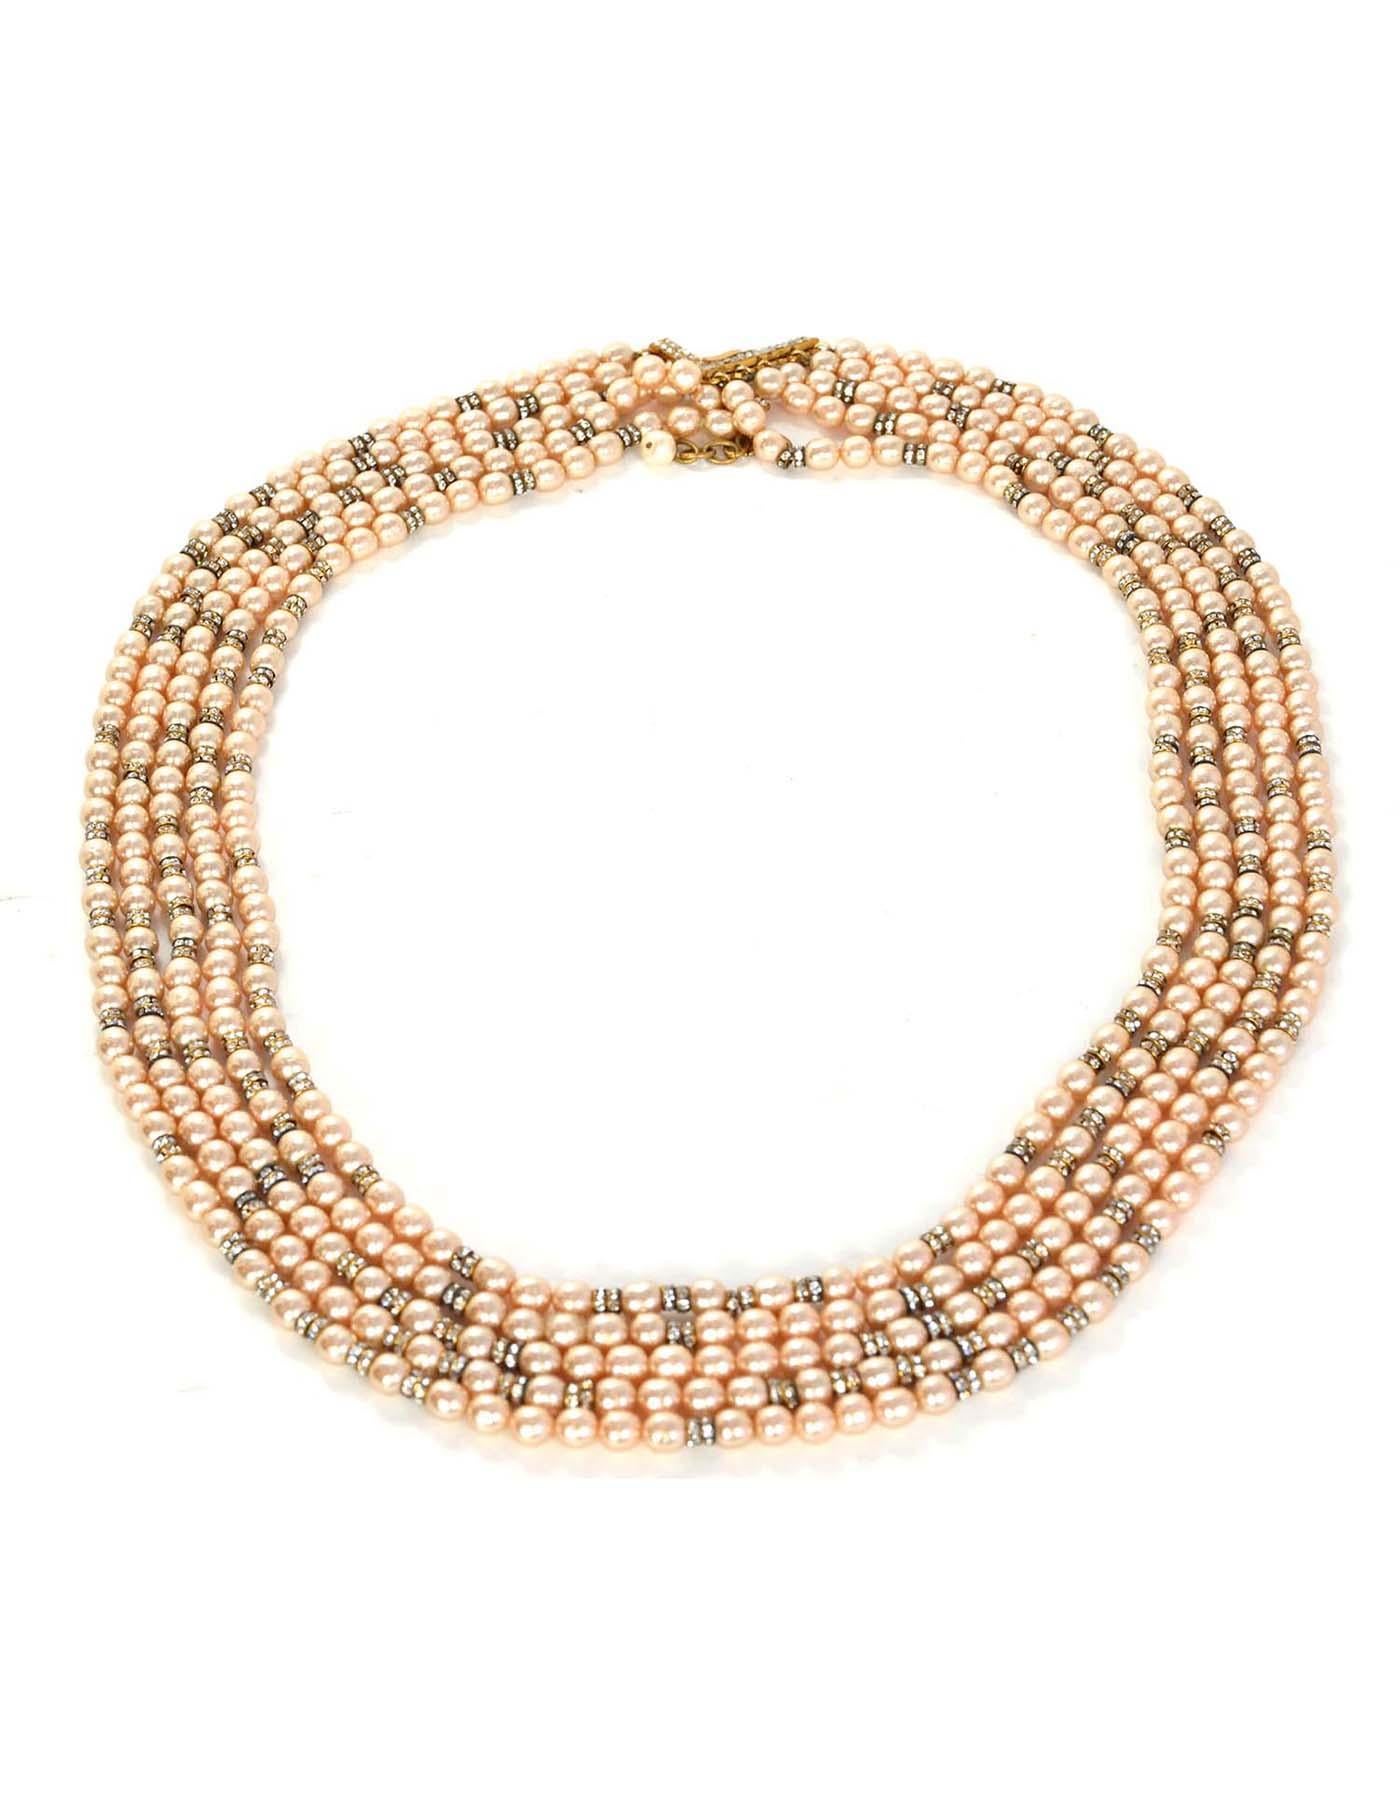 Chanel Vintage 1990s Multi-Strand Faux Pearl & Crystal Rondelle Necklace In Good Condition For Sale In New York, NY